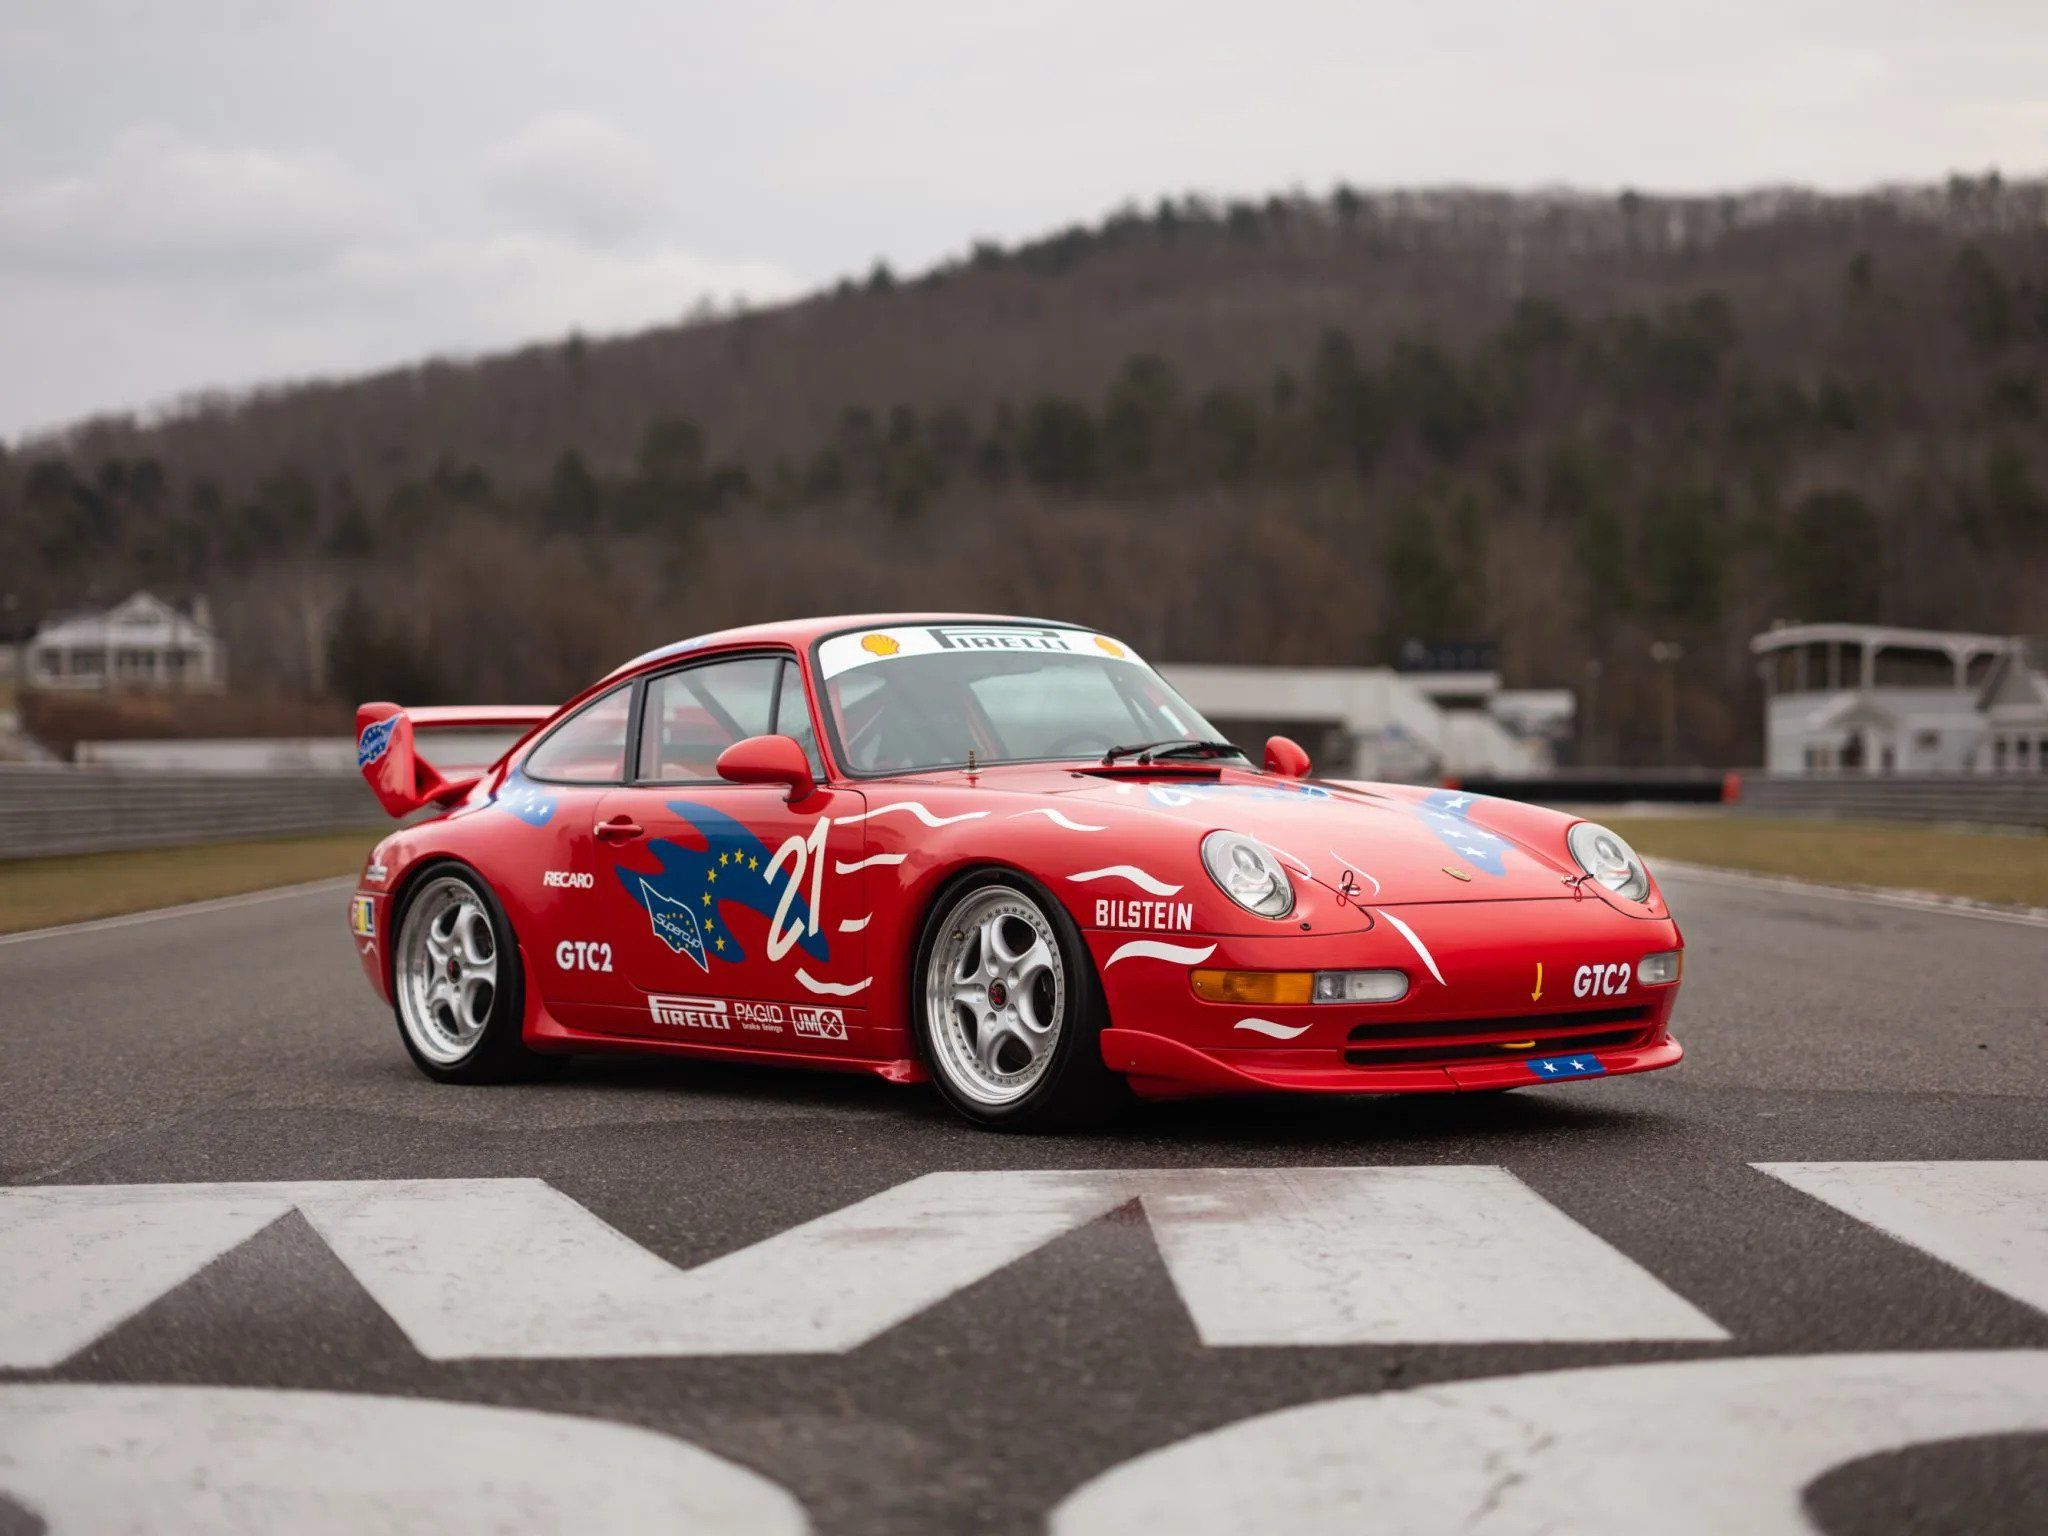 This 90s Porsche Spec Racer Might Be the Best Track Car on Sale Today